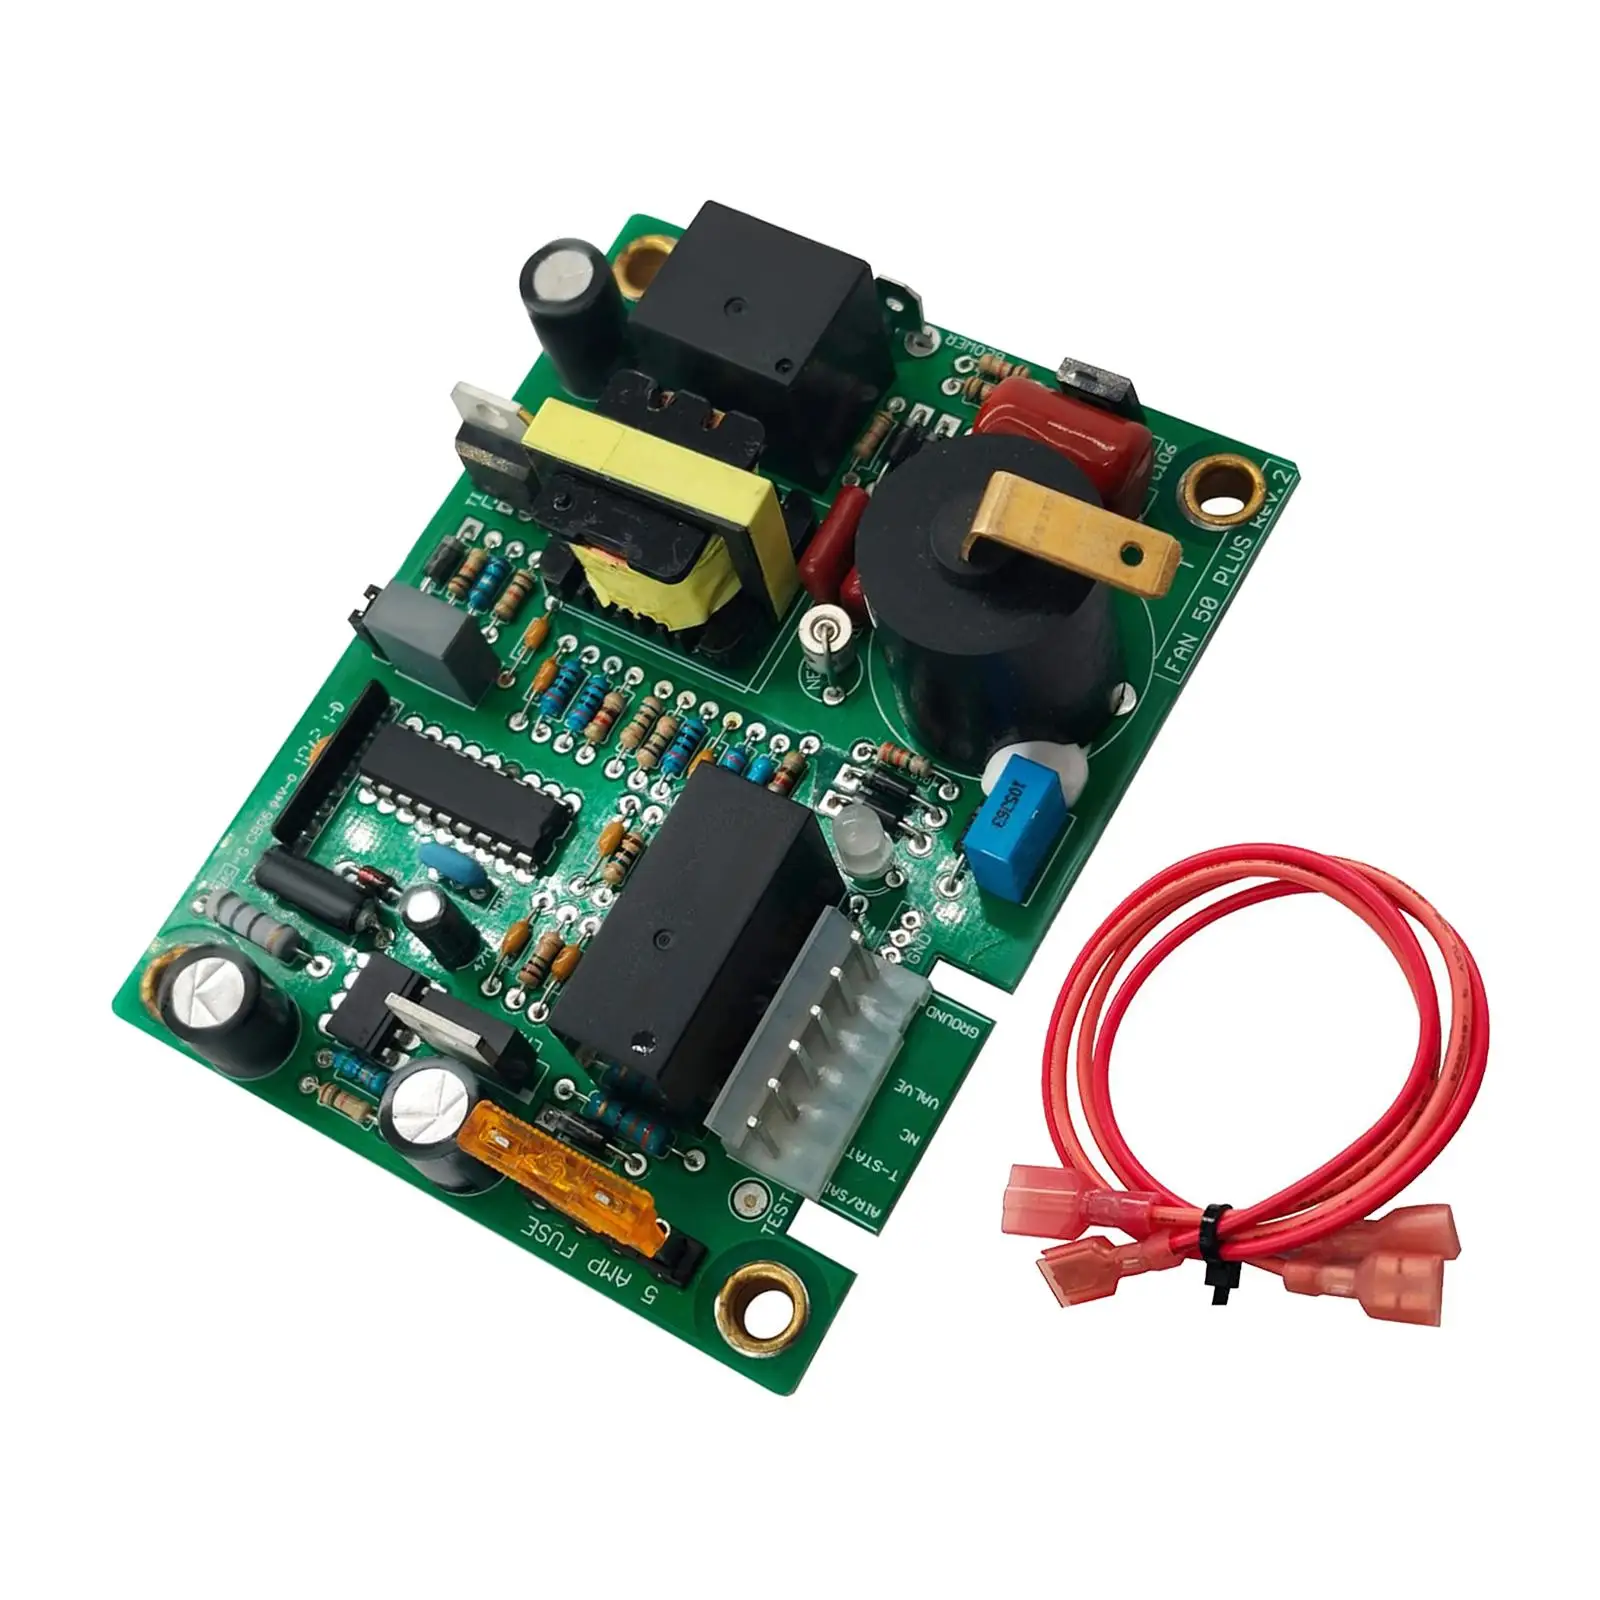 Ignitor Circuit Board Direct Replace Professional Accessories with Fan Control